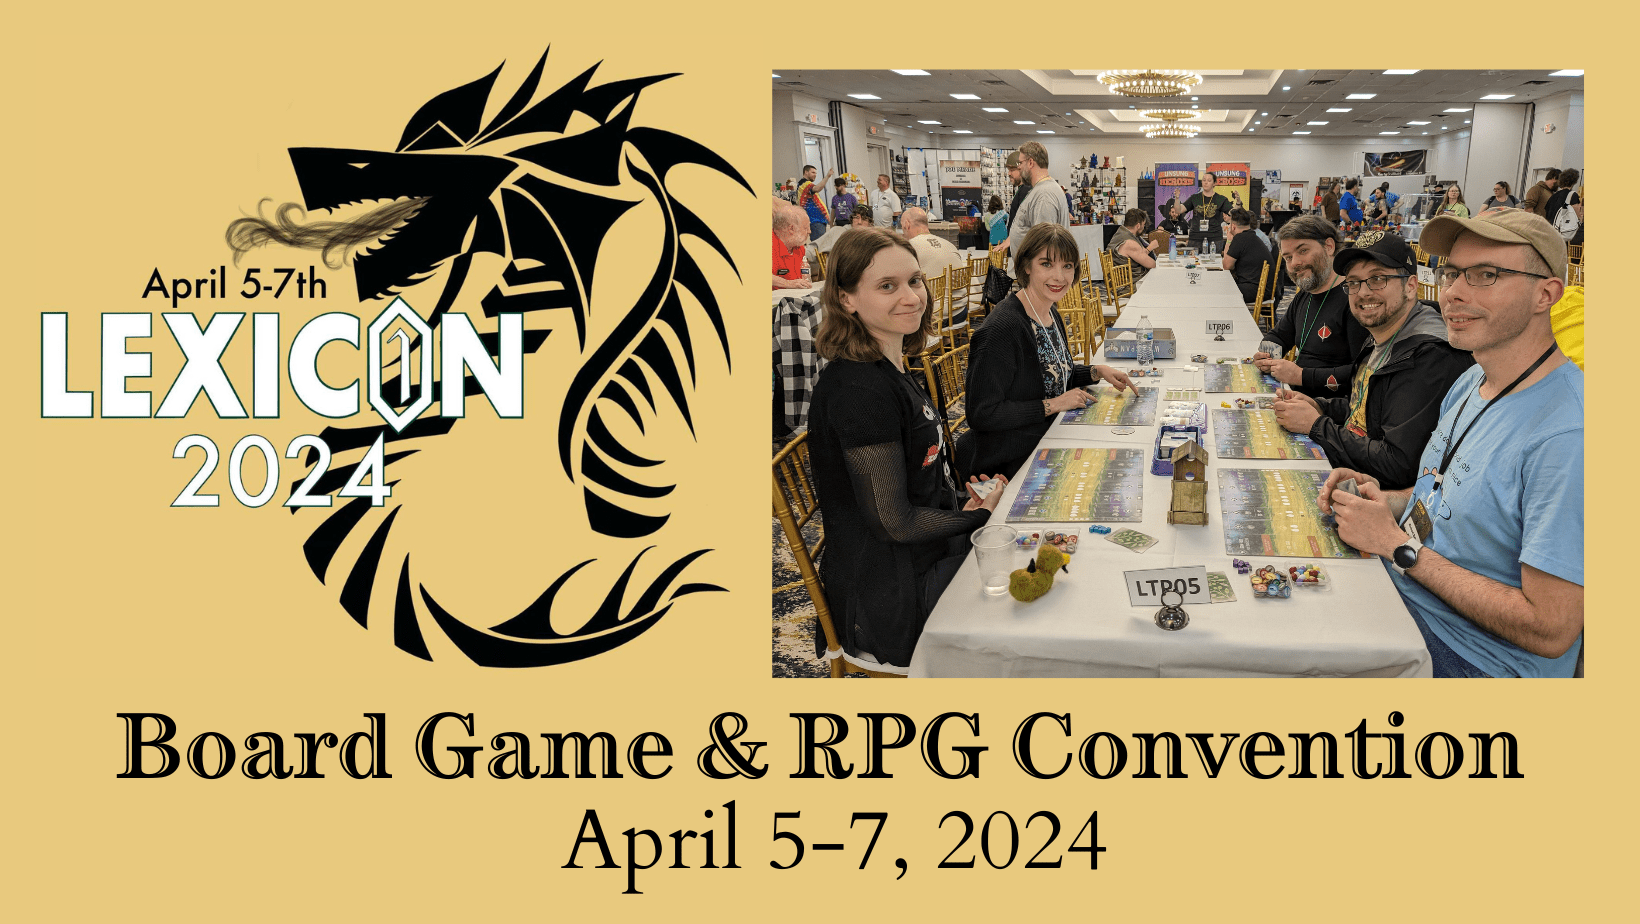 LexiCon Board Game and RPG Convention to happen April 5-7, 2024